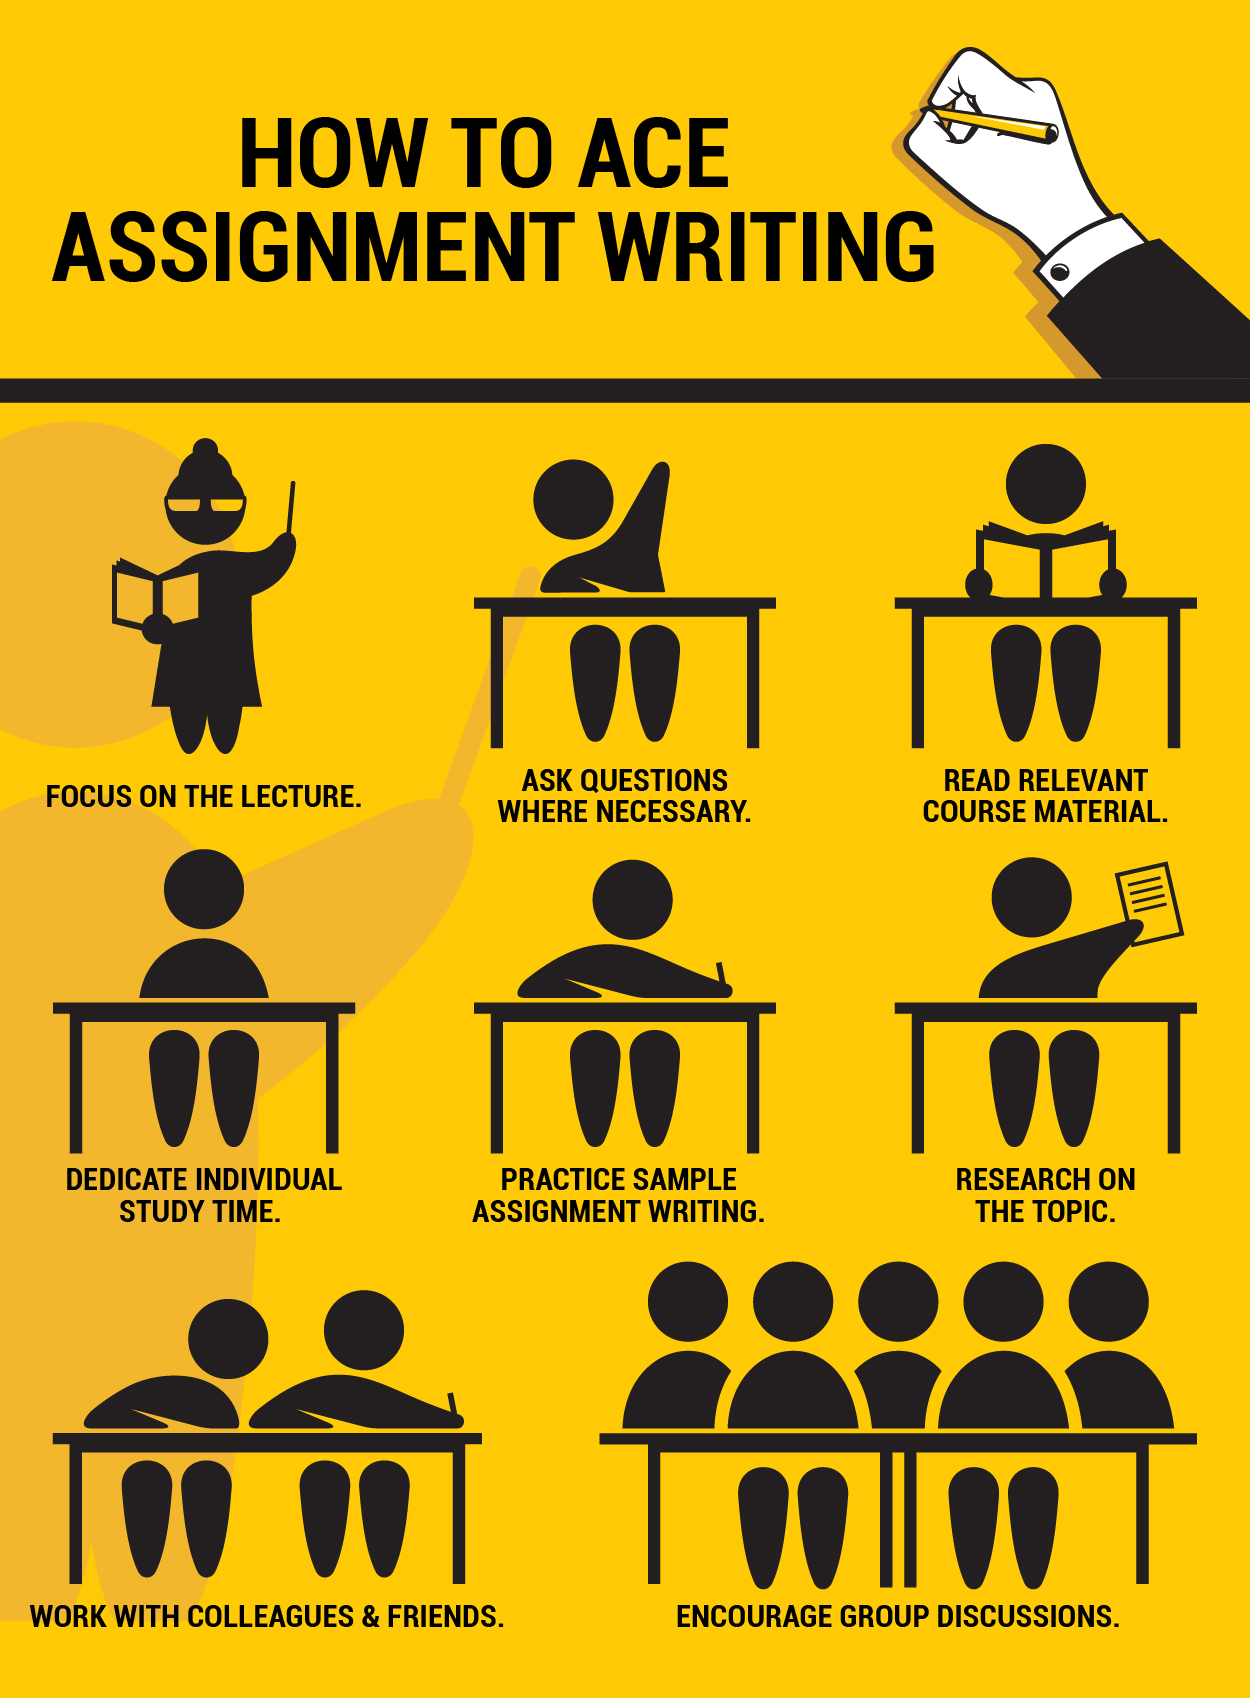 Add These 10 Mangets To Your Assignment Writing Services